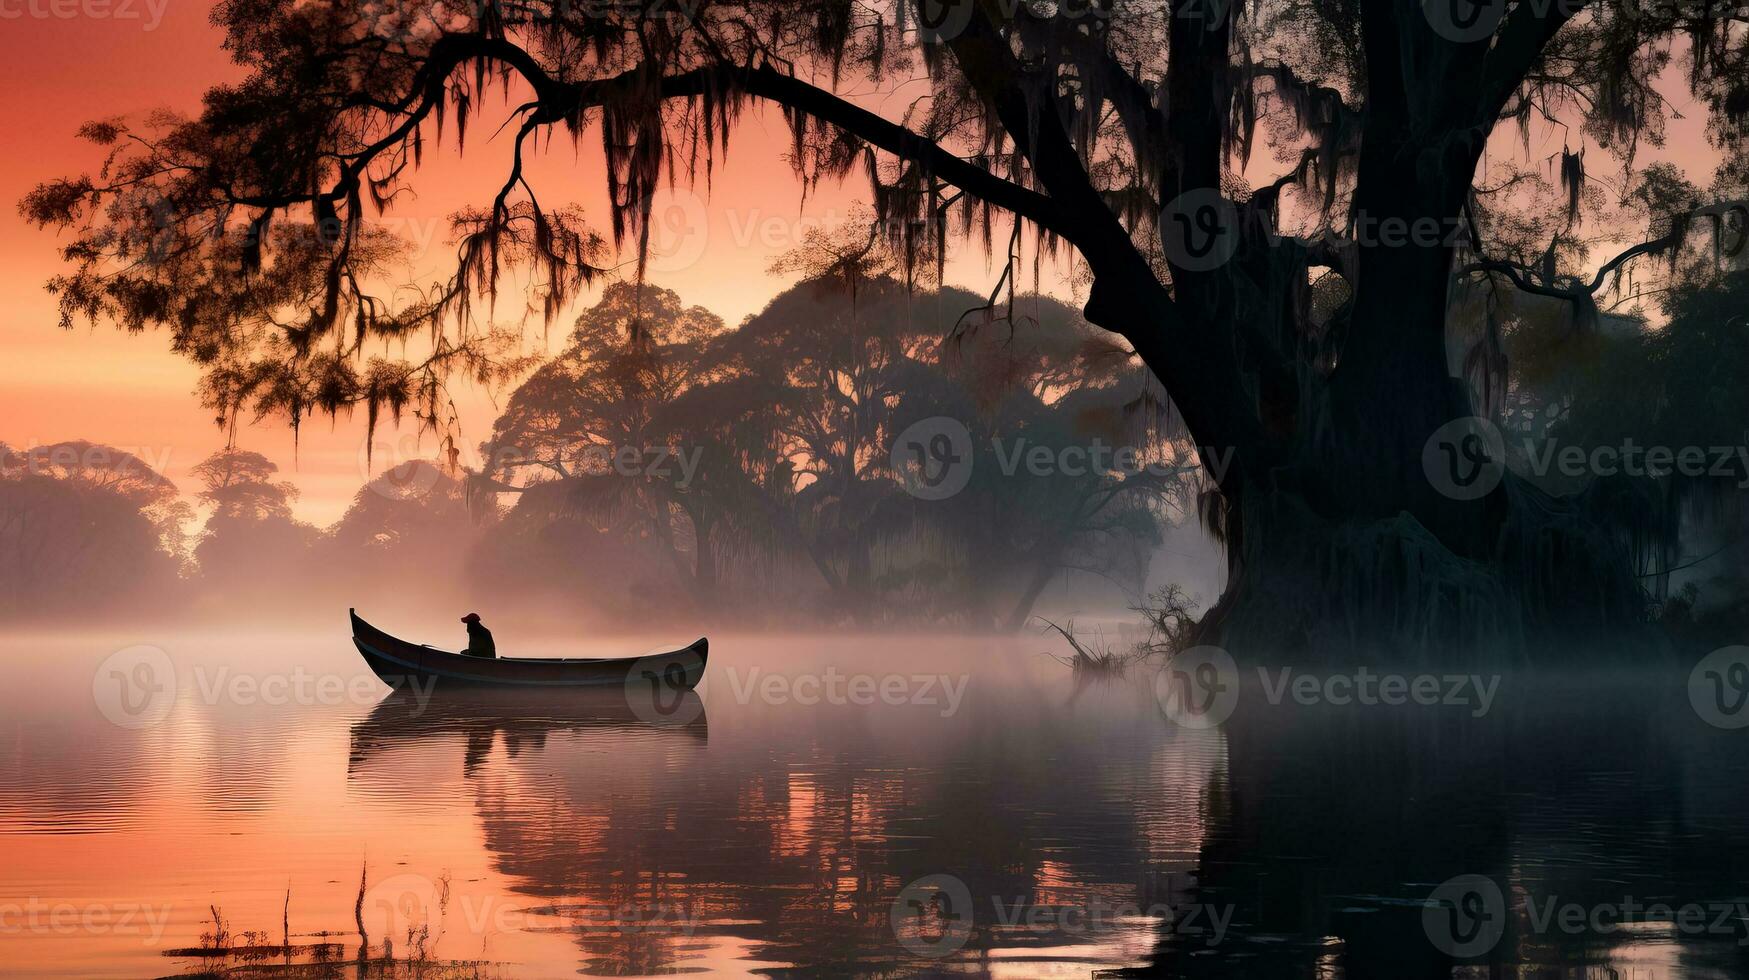 As the sun rises a mystical fog blankets the serene countryside revealing majestic trees and tranquil lakes photo